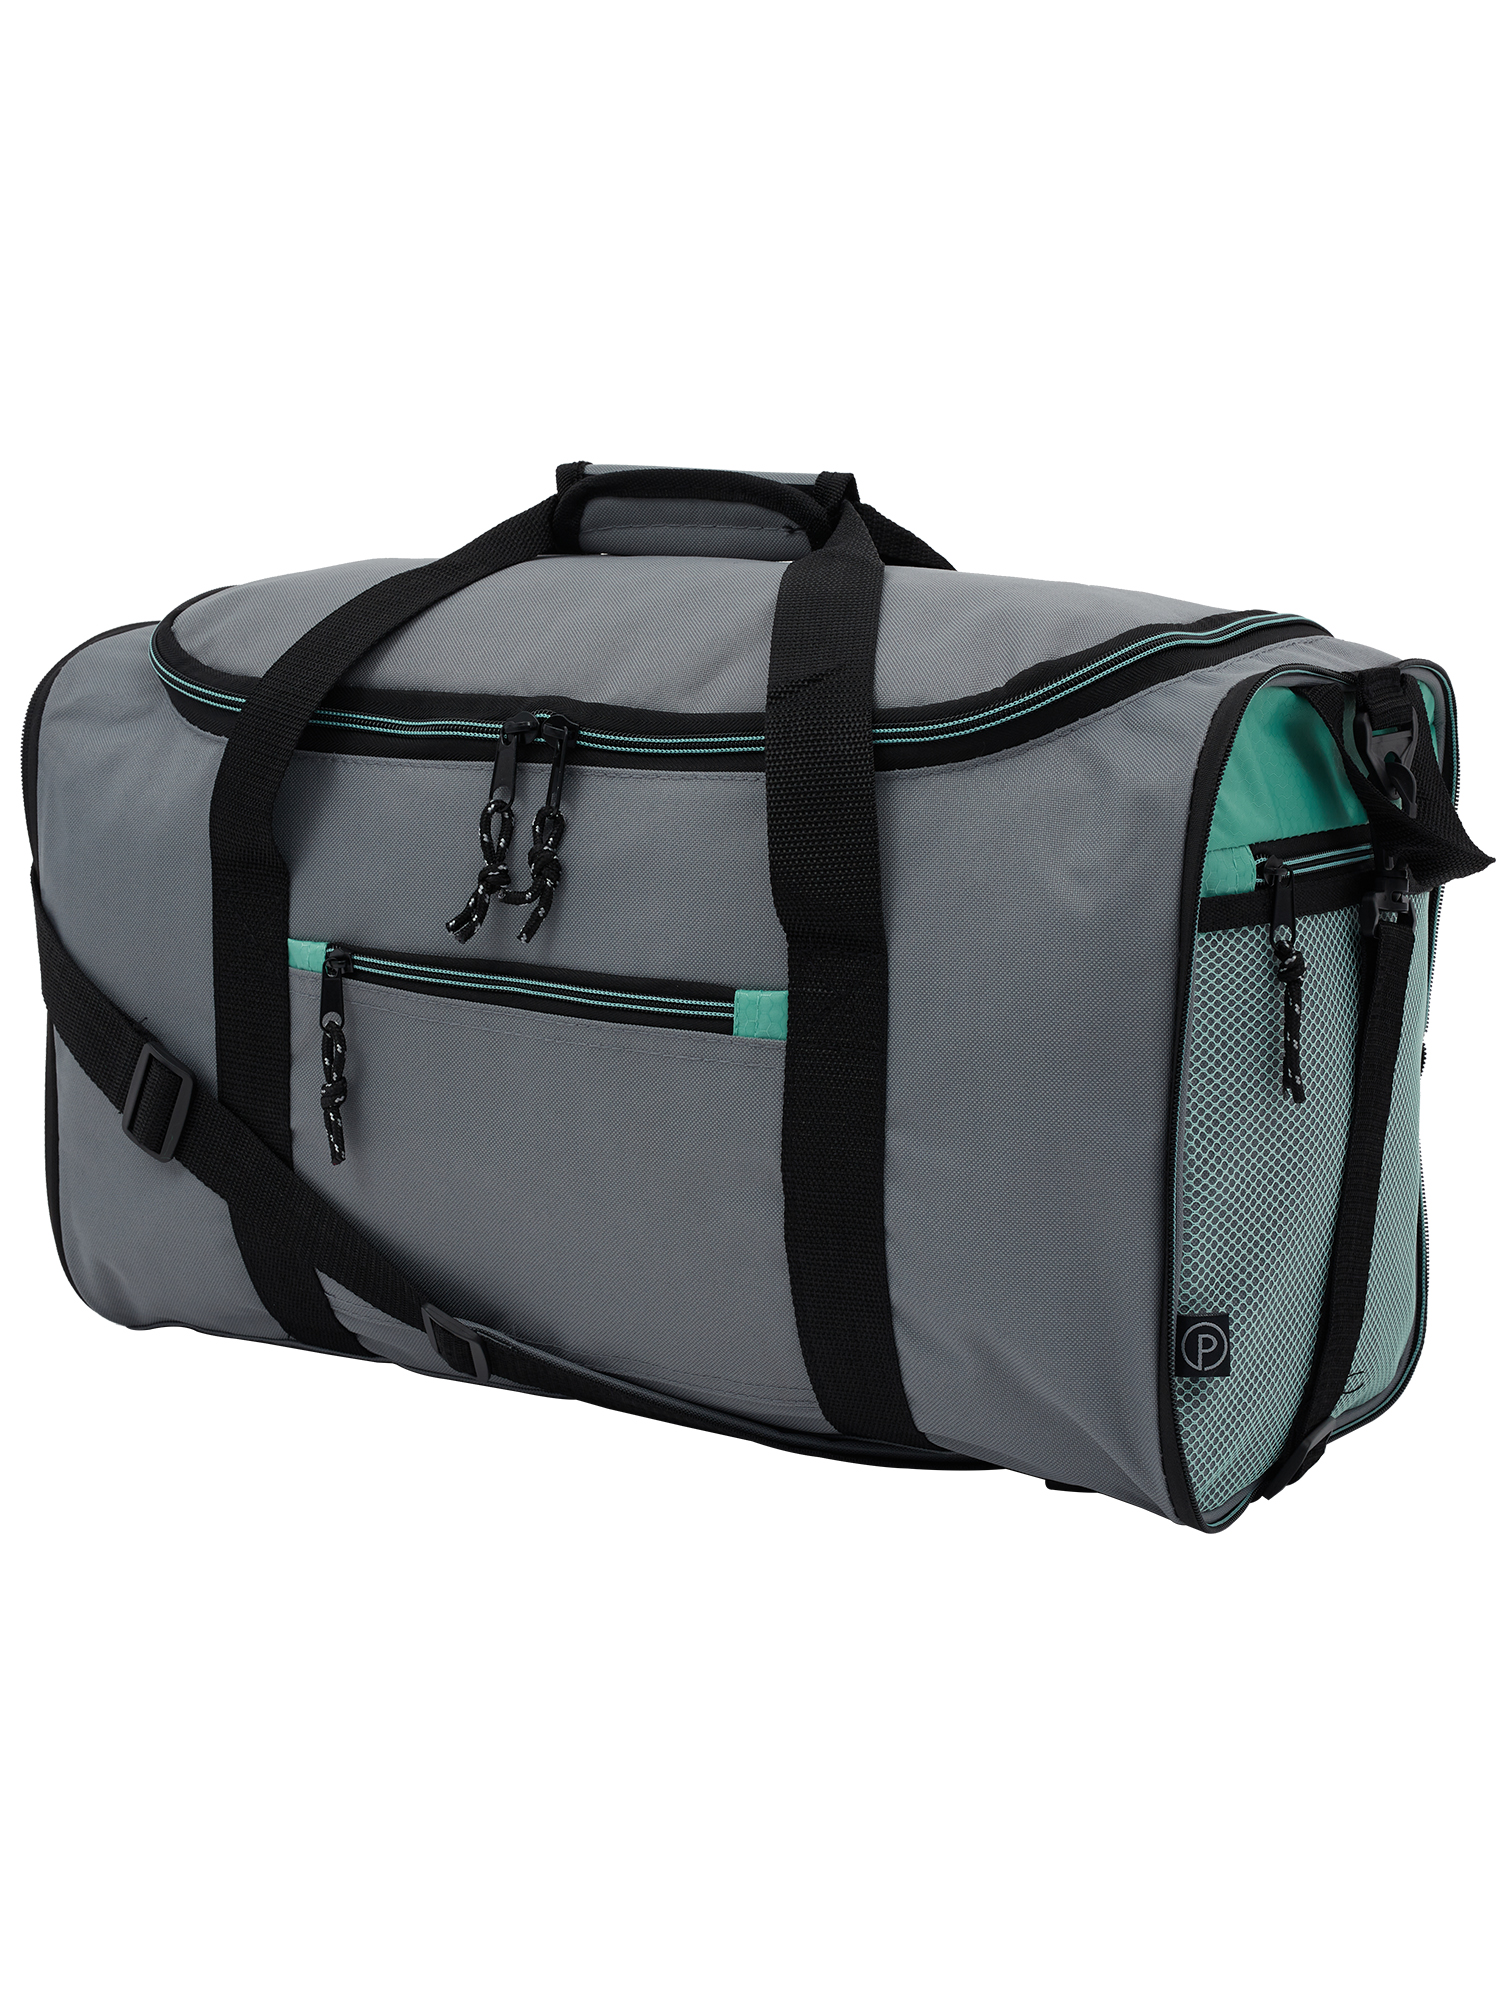 Protégé 20" Collapsible Polyester Sport and Travel Duffel Bag, Gray - image 3 of 9